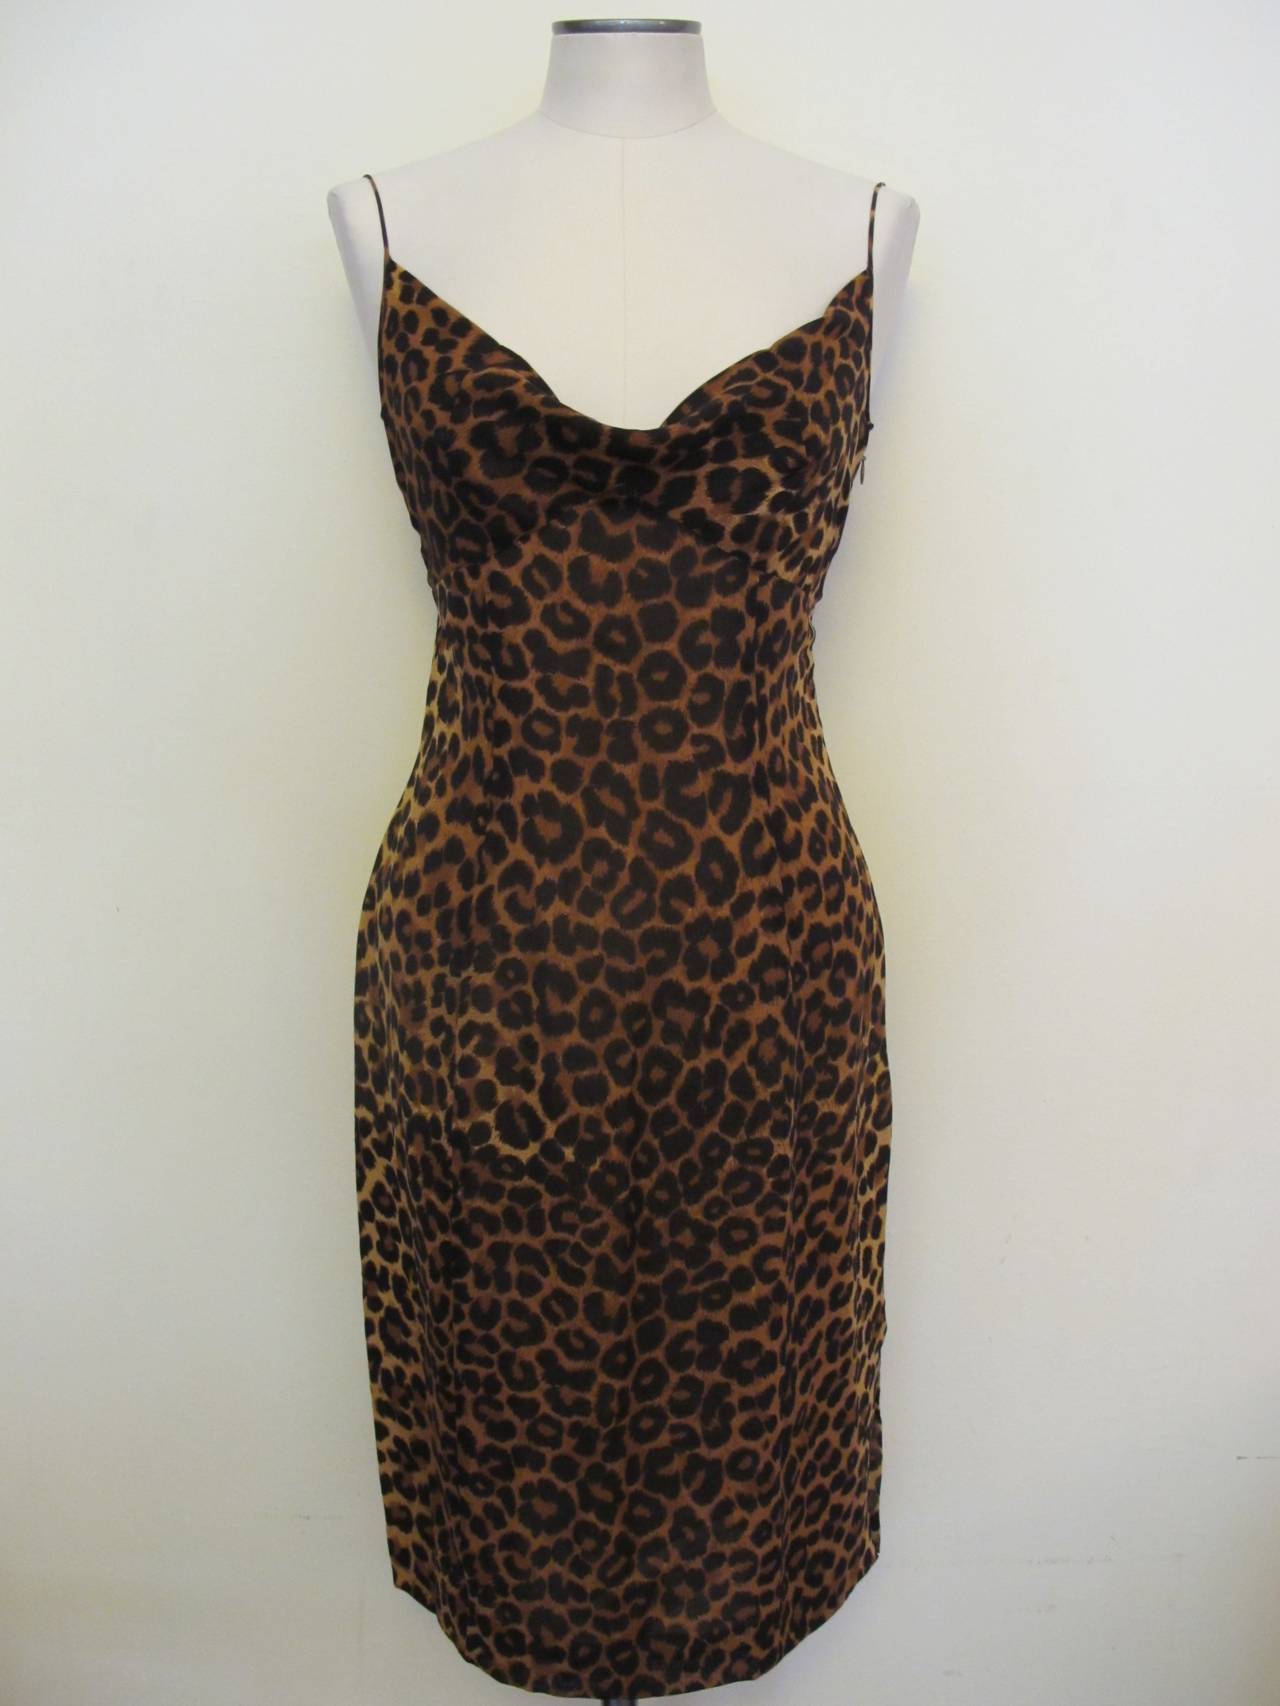 John Galliano's genius is reflected in this stunning leopard dress which is cut on the bias and lined in 100% silk. The 100% Silk Leopard Fabric is of the highest quality and the dress lends itself to shaping the body to perfection. The dress is new